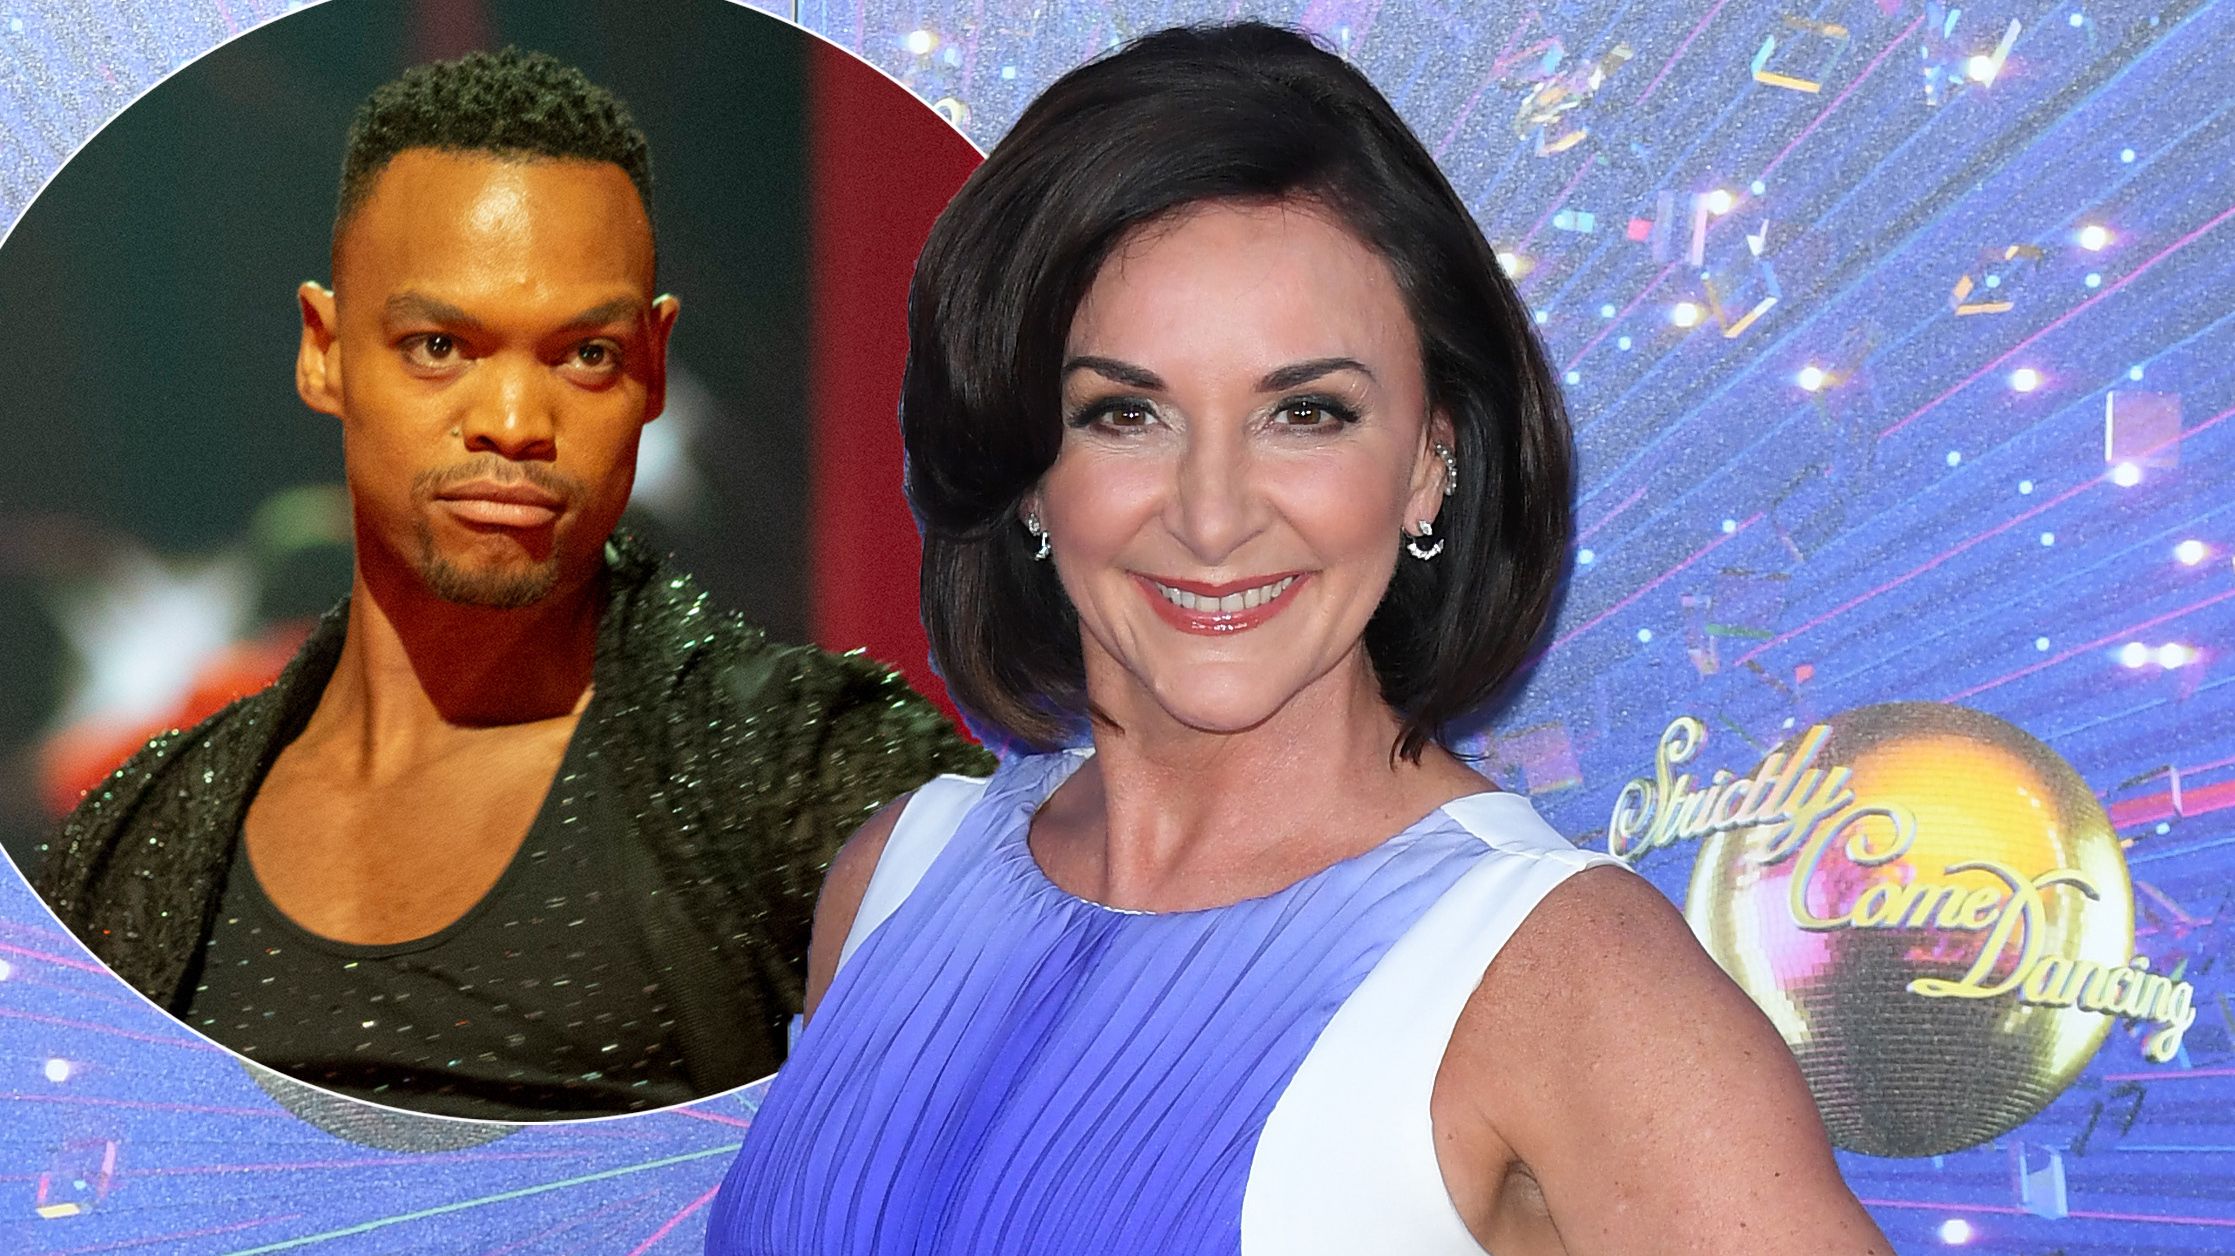 Strictly Come Dancing Shirley Ballas Warns Fans The Same Sex Dance Will Be Very Emotional